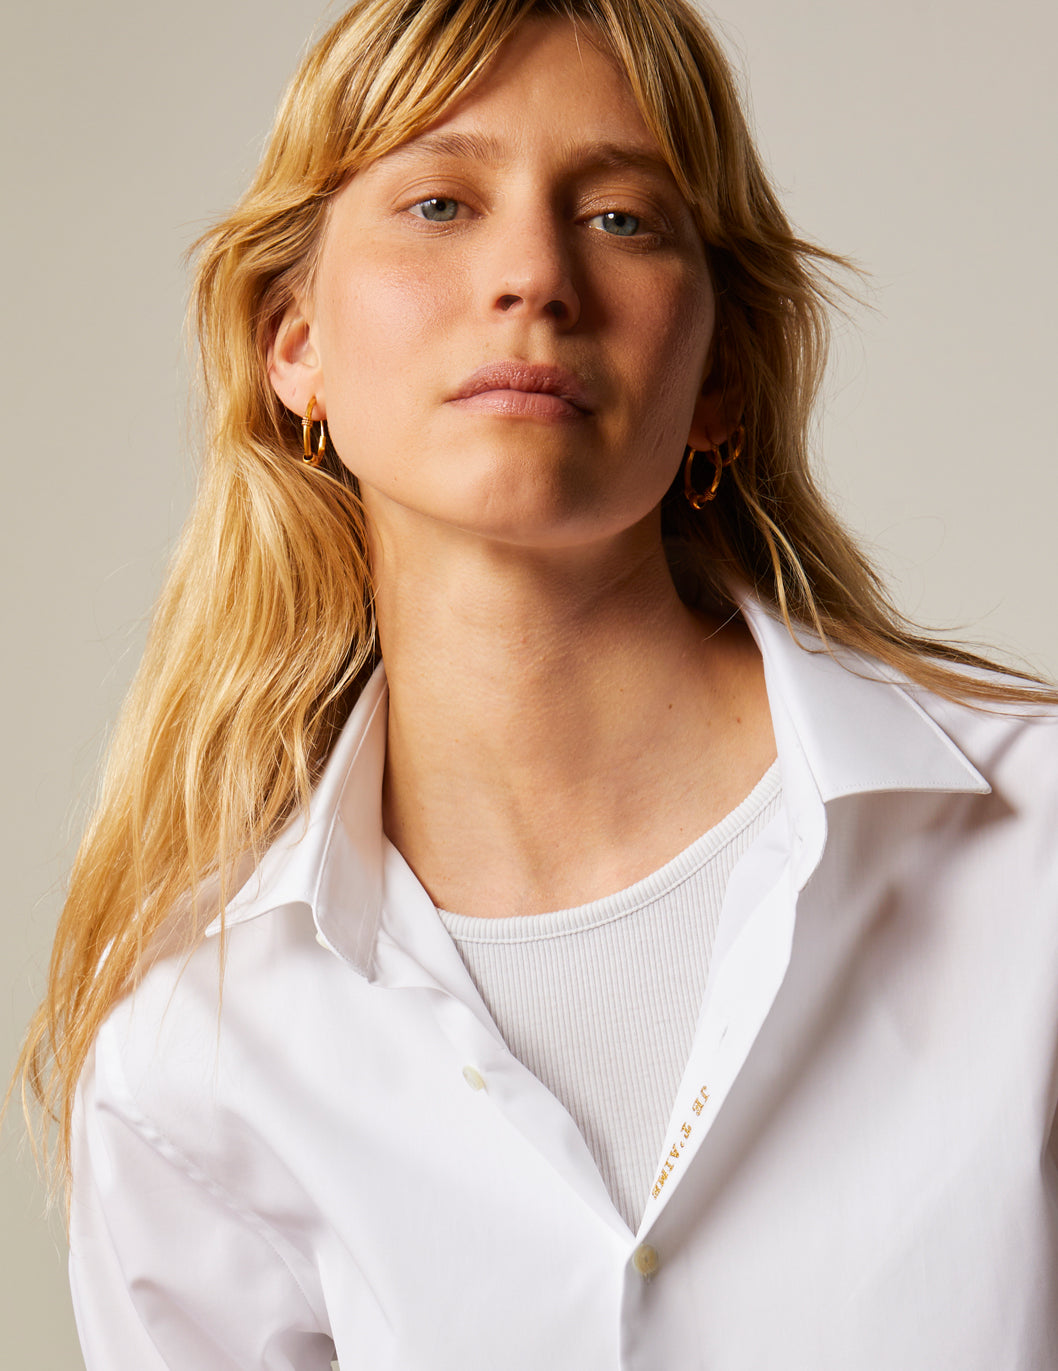 "JE T'AIME" WHITE SHIRT EMBROIDERED IN GOLD - Poplin - Figaret Collar